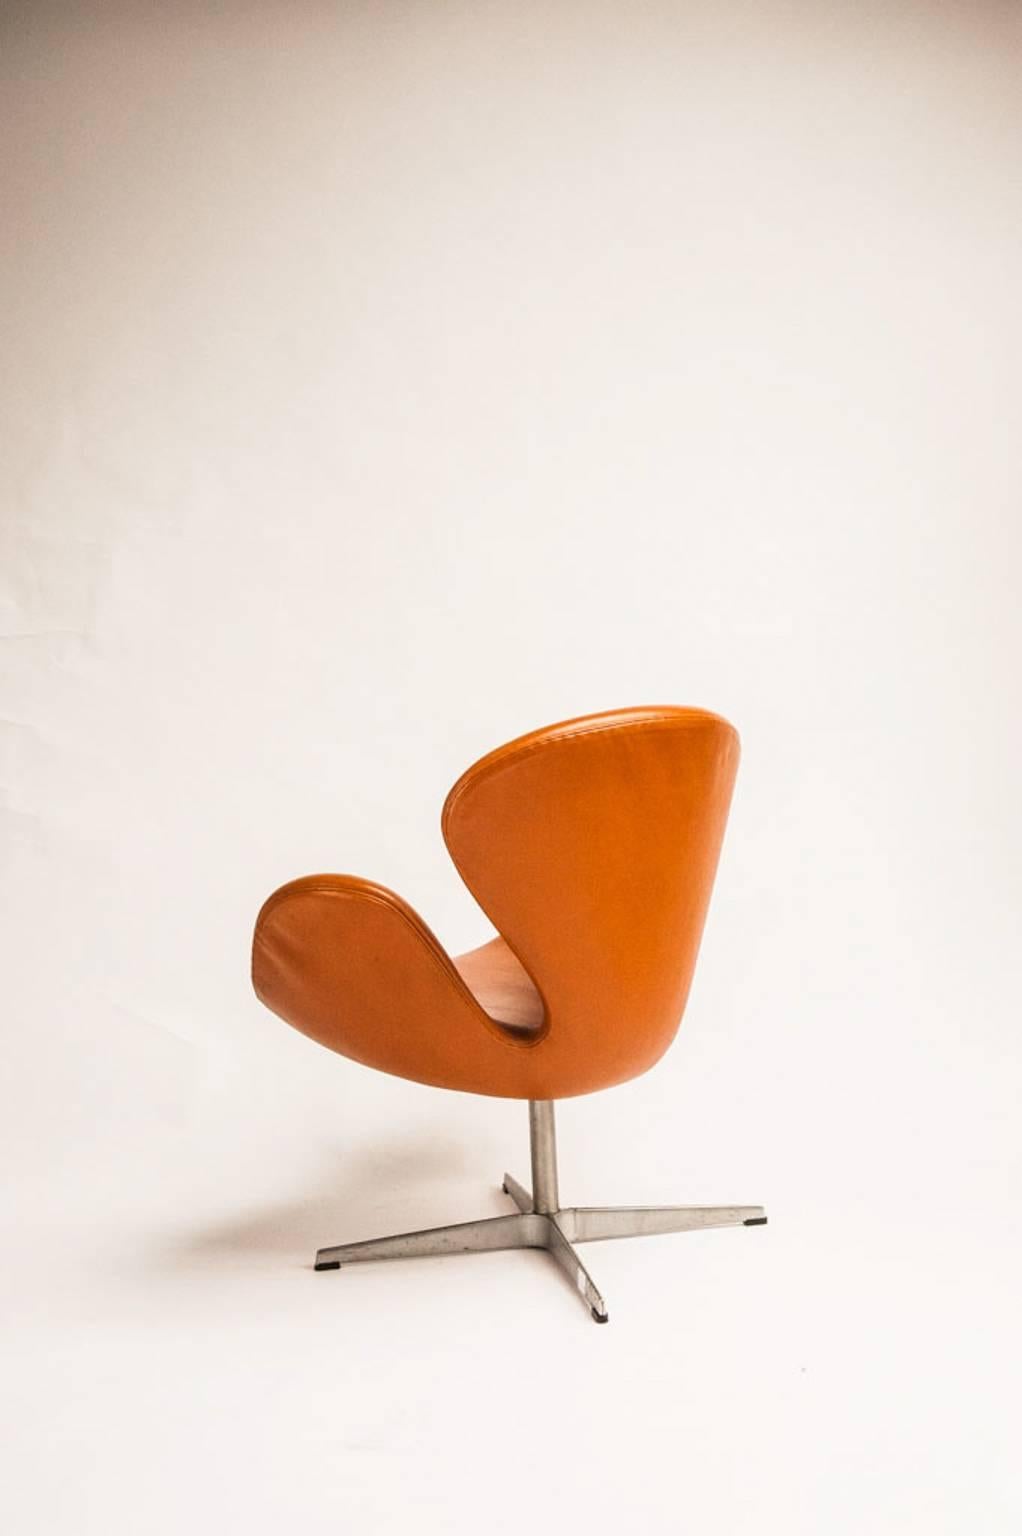 In 1958, the SAS Royal Hotel in Copenhagen commissioned Arne Jacobsen to design chairs for its lounges and reception area. The result is the Swan chair, model 3320, the drop, and the egg chair. Jacobsen created the original Swan chair in his own